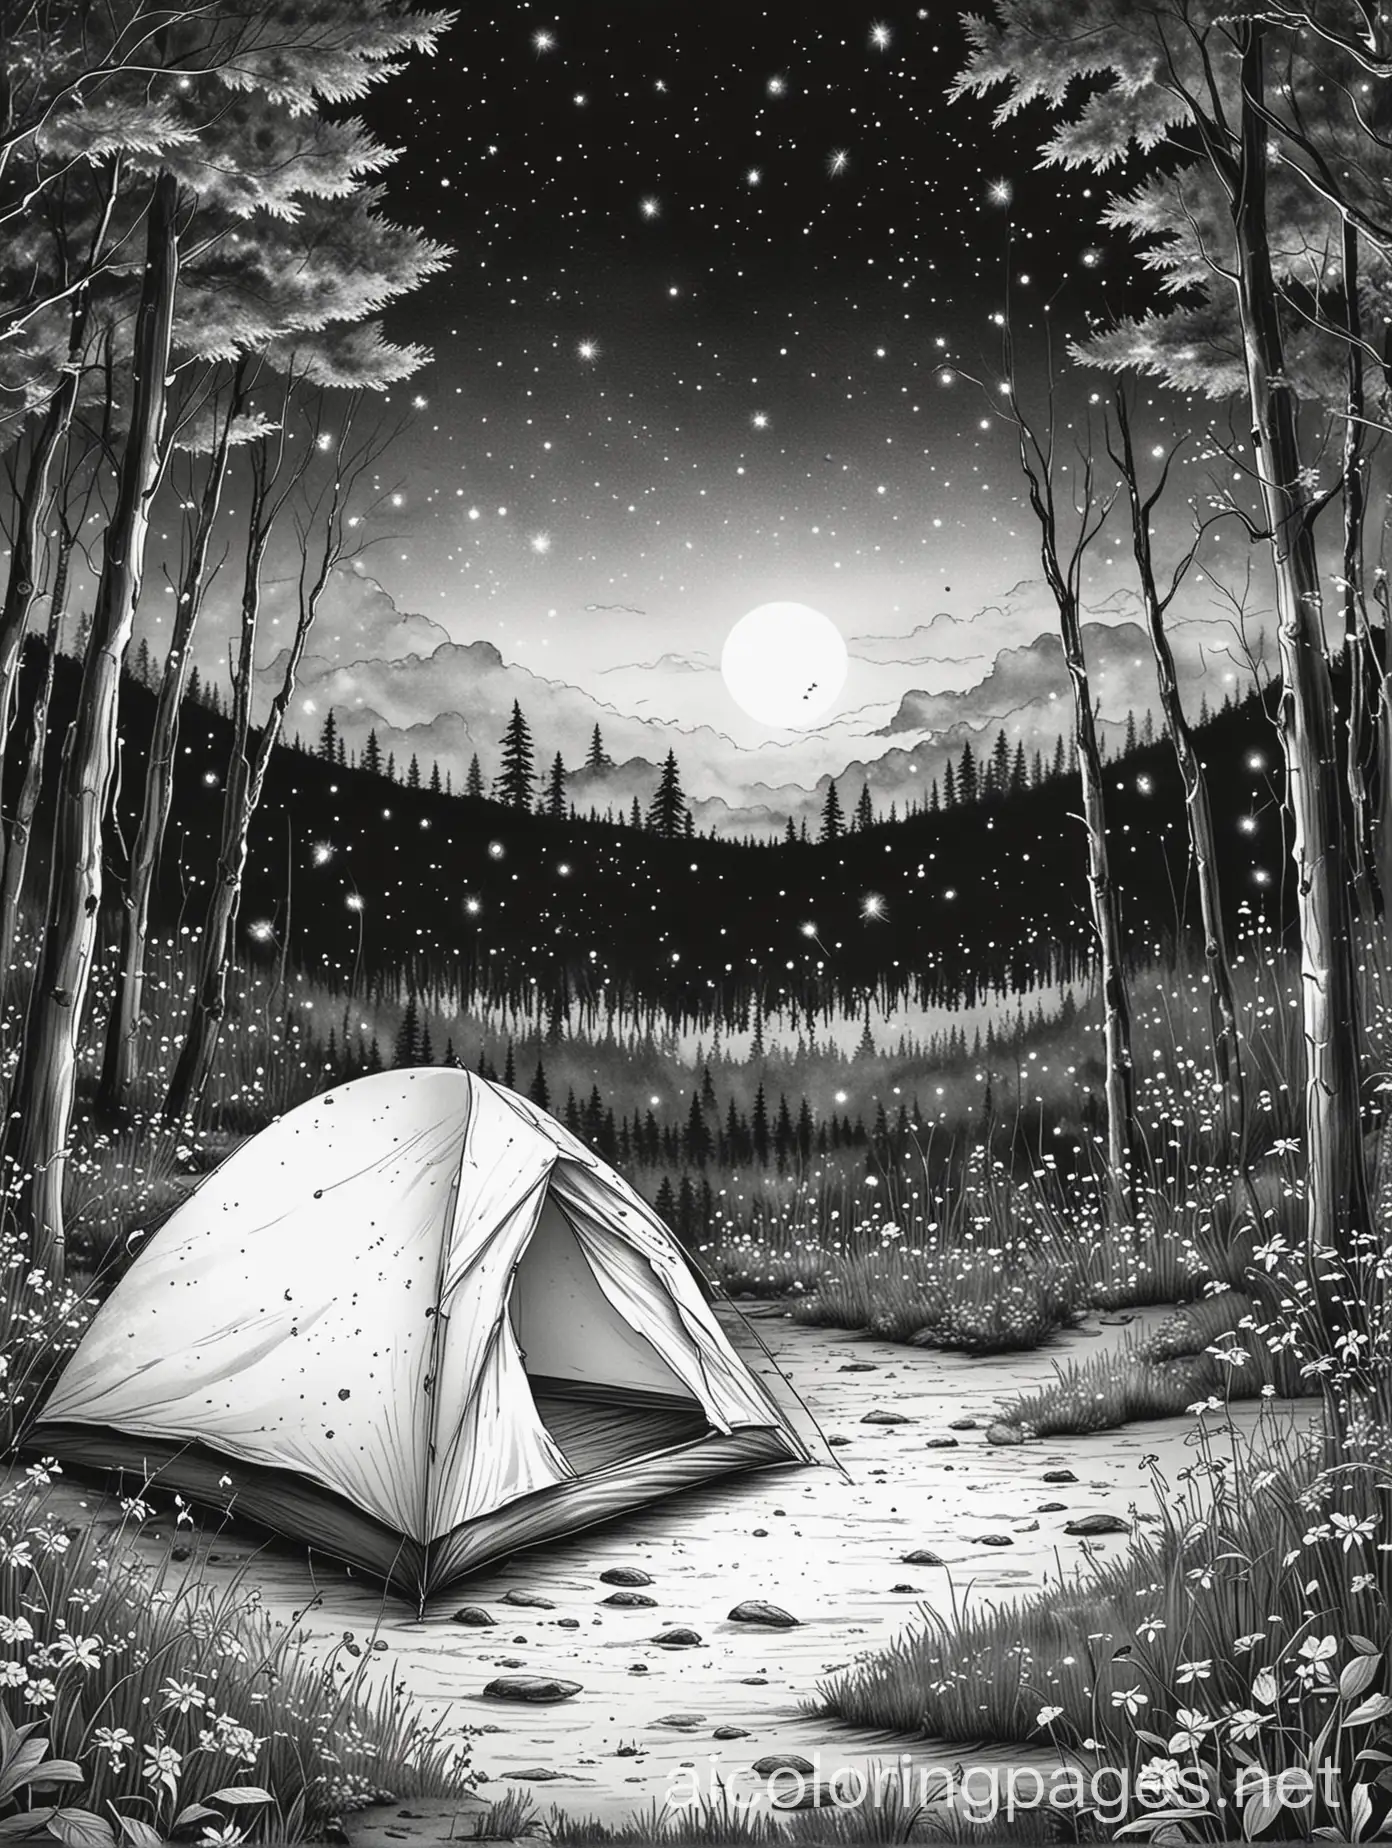 fireflies over a tent at night, Coloring Page, black and white, line art, white background, Simplicity, Ample White Space. The background of the coloring page is plain white to make it easy for young children to color within the lines. The outlines of all the subjects are easy to distinguish, making it simple for kids to color without too much difficulty